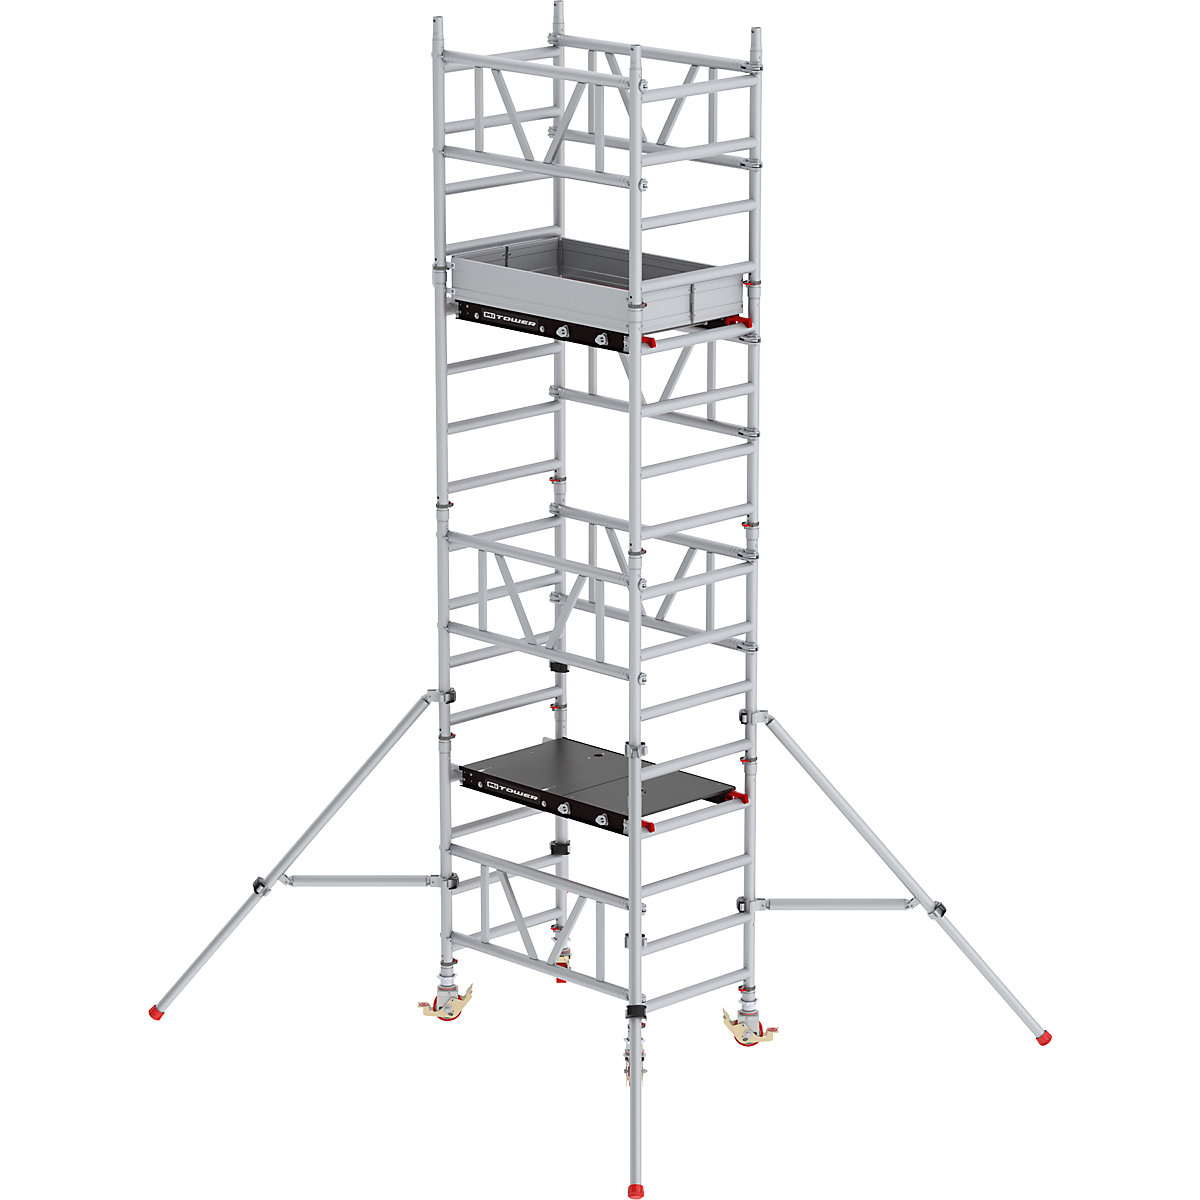 Standard MiTOWER quick assembly mobile access tower – Altrex, Fiber-Deck® platform, LxW 1200 x 750 mm, working height 5 m-23